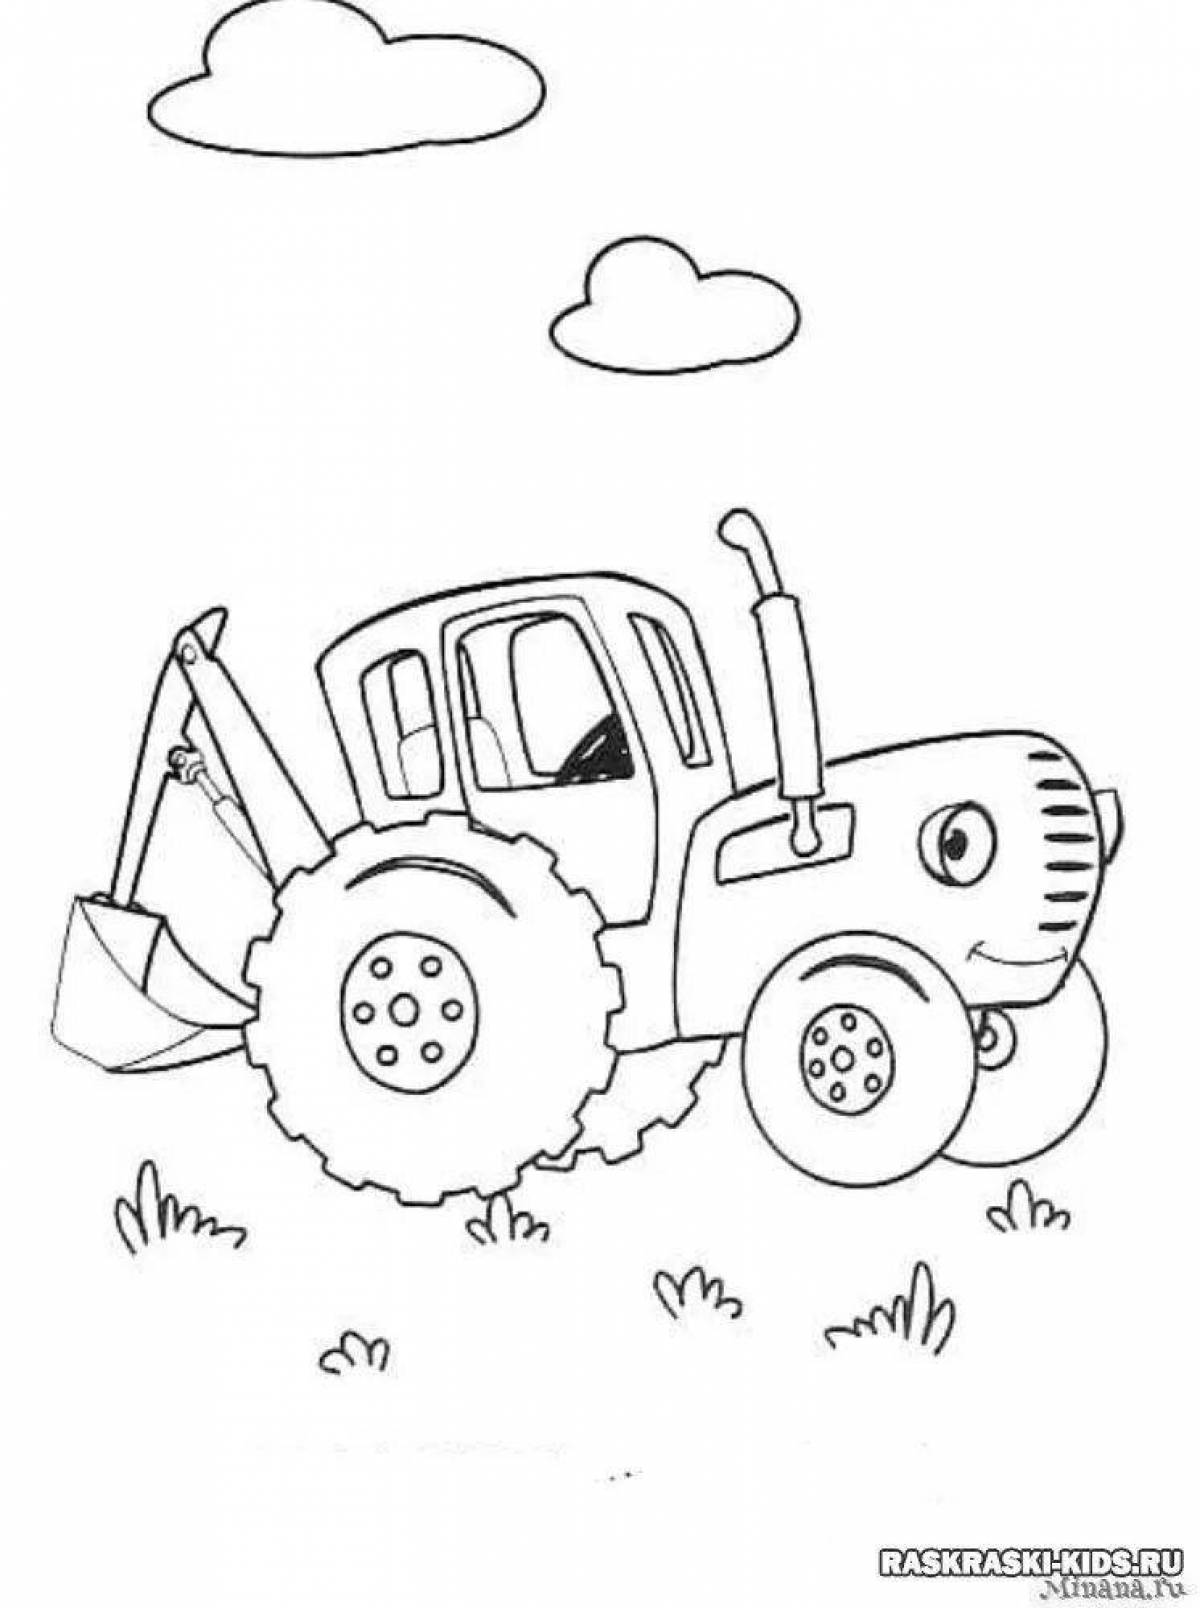 Coloring page awesome cat and blue tractor